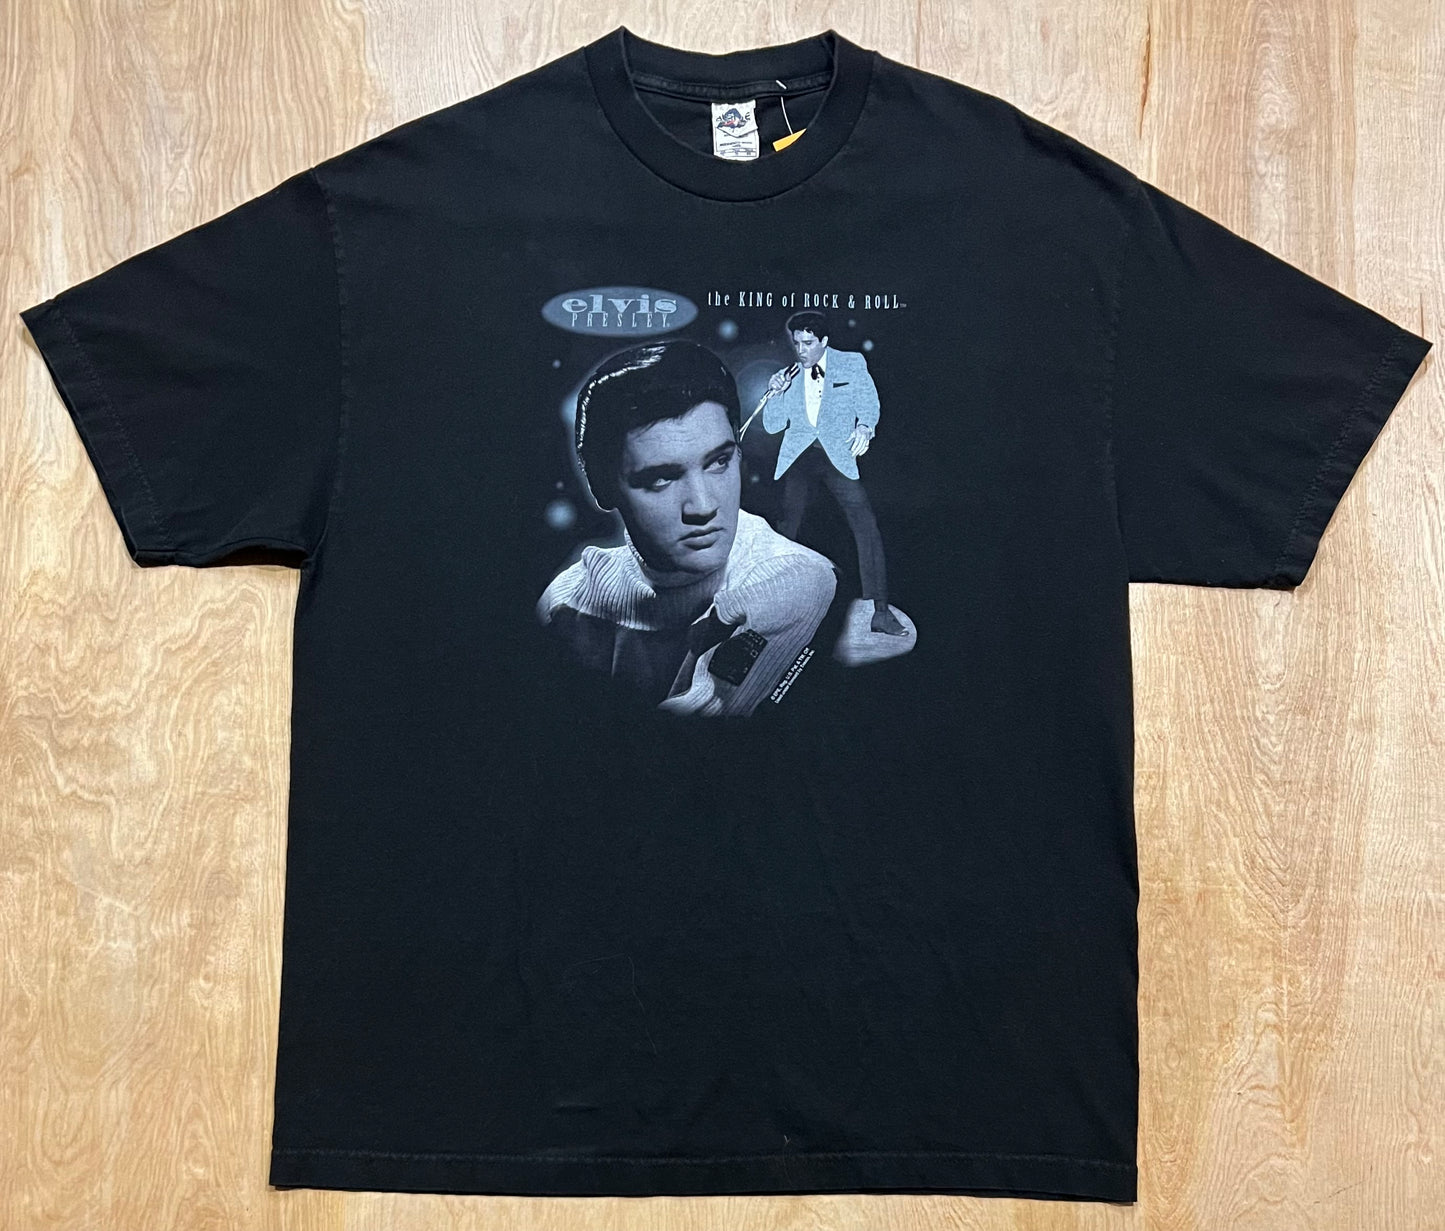 "The King Of Rock And Roll" Elvis Presley T-Shirt